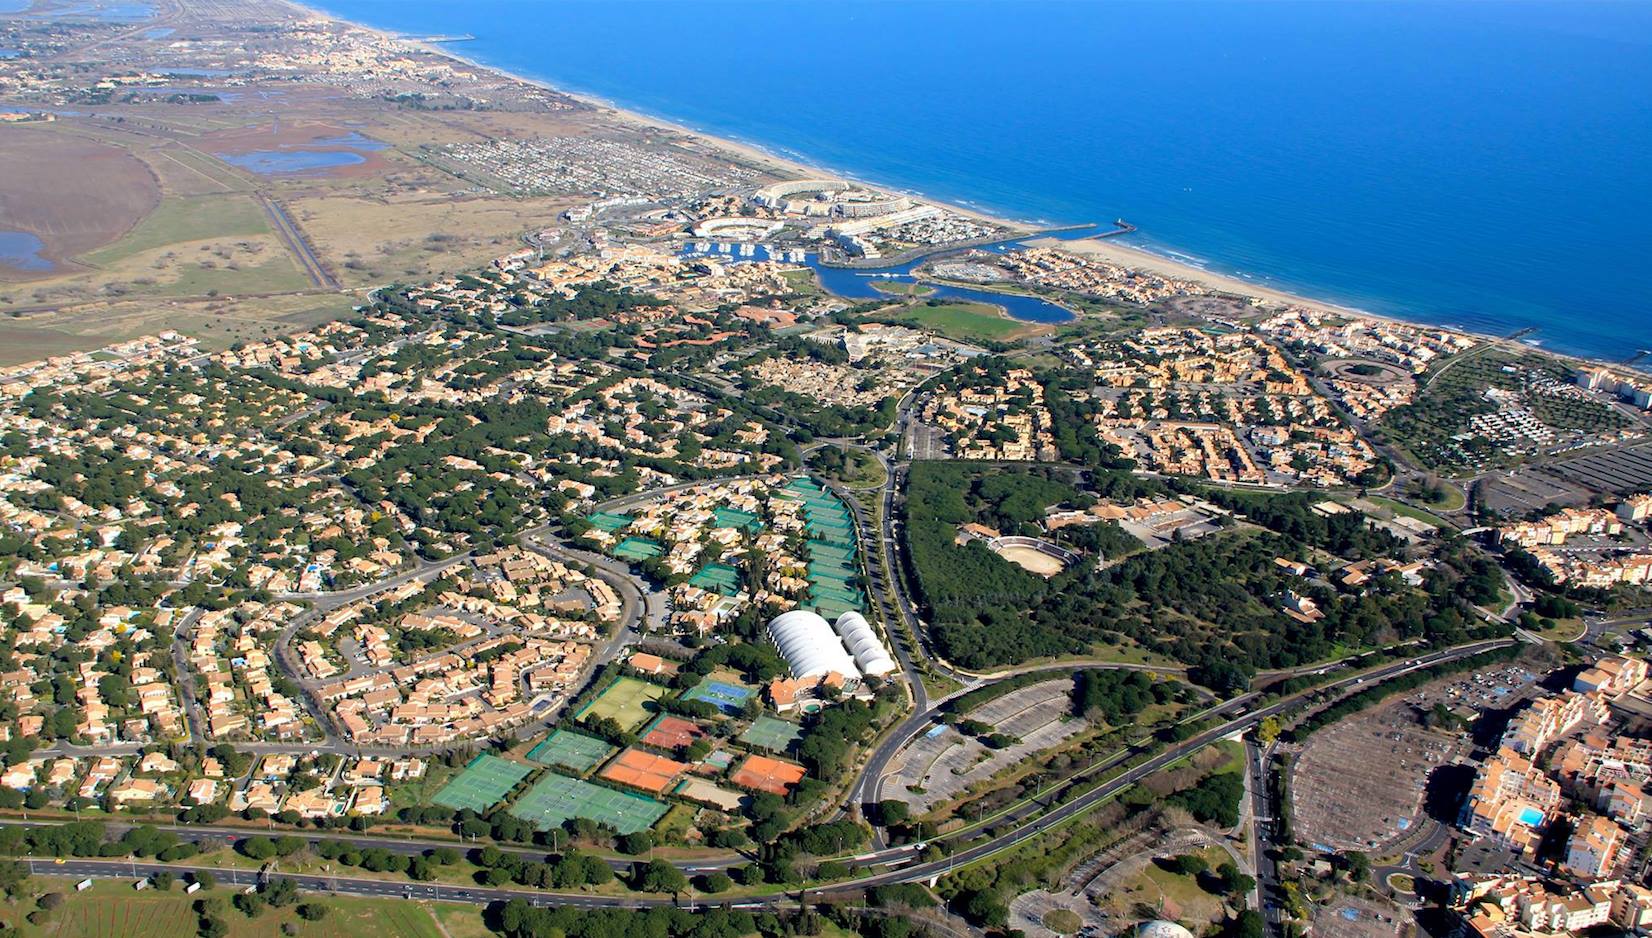 La Padelpro Cup will take place at the Center International du Cap d'Agde